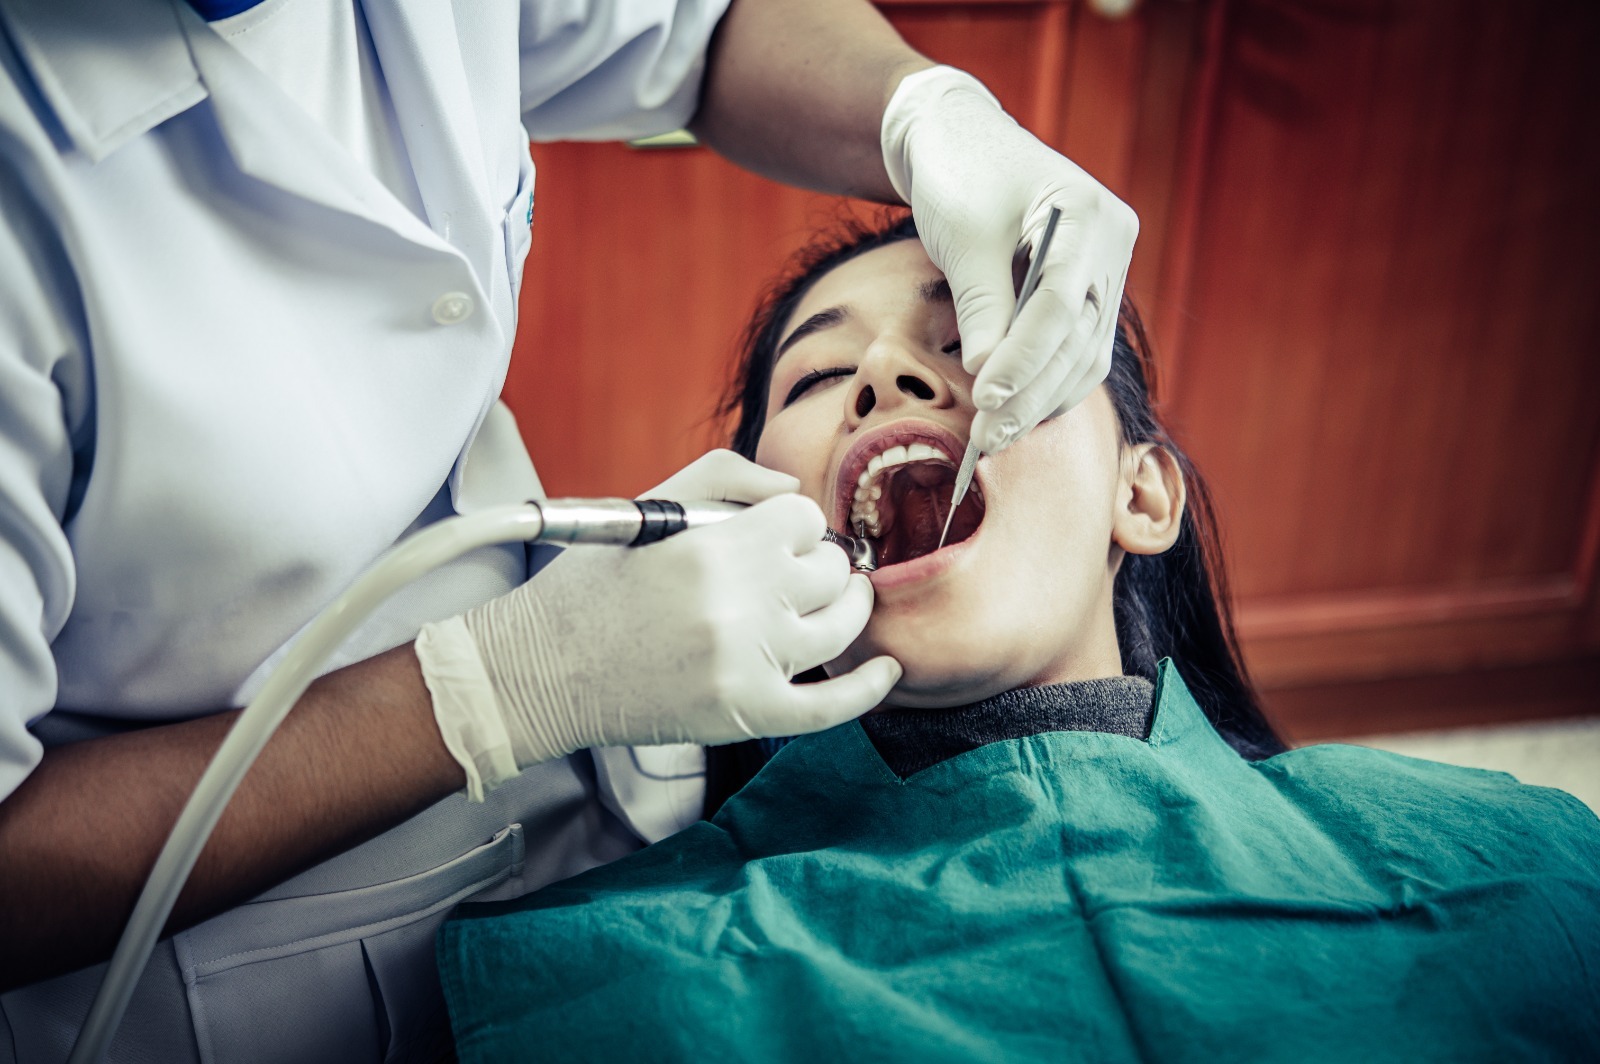 treatments for teeth grinding by dentist in gurgaon